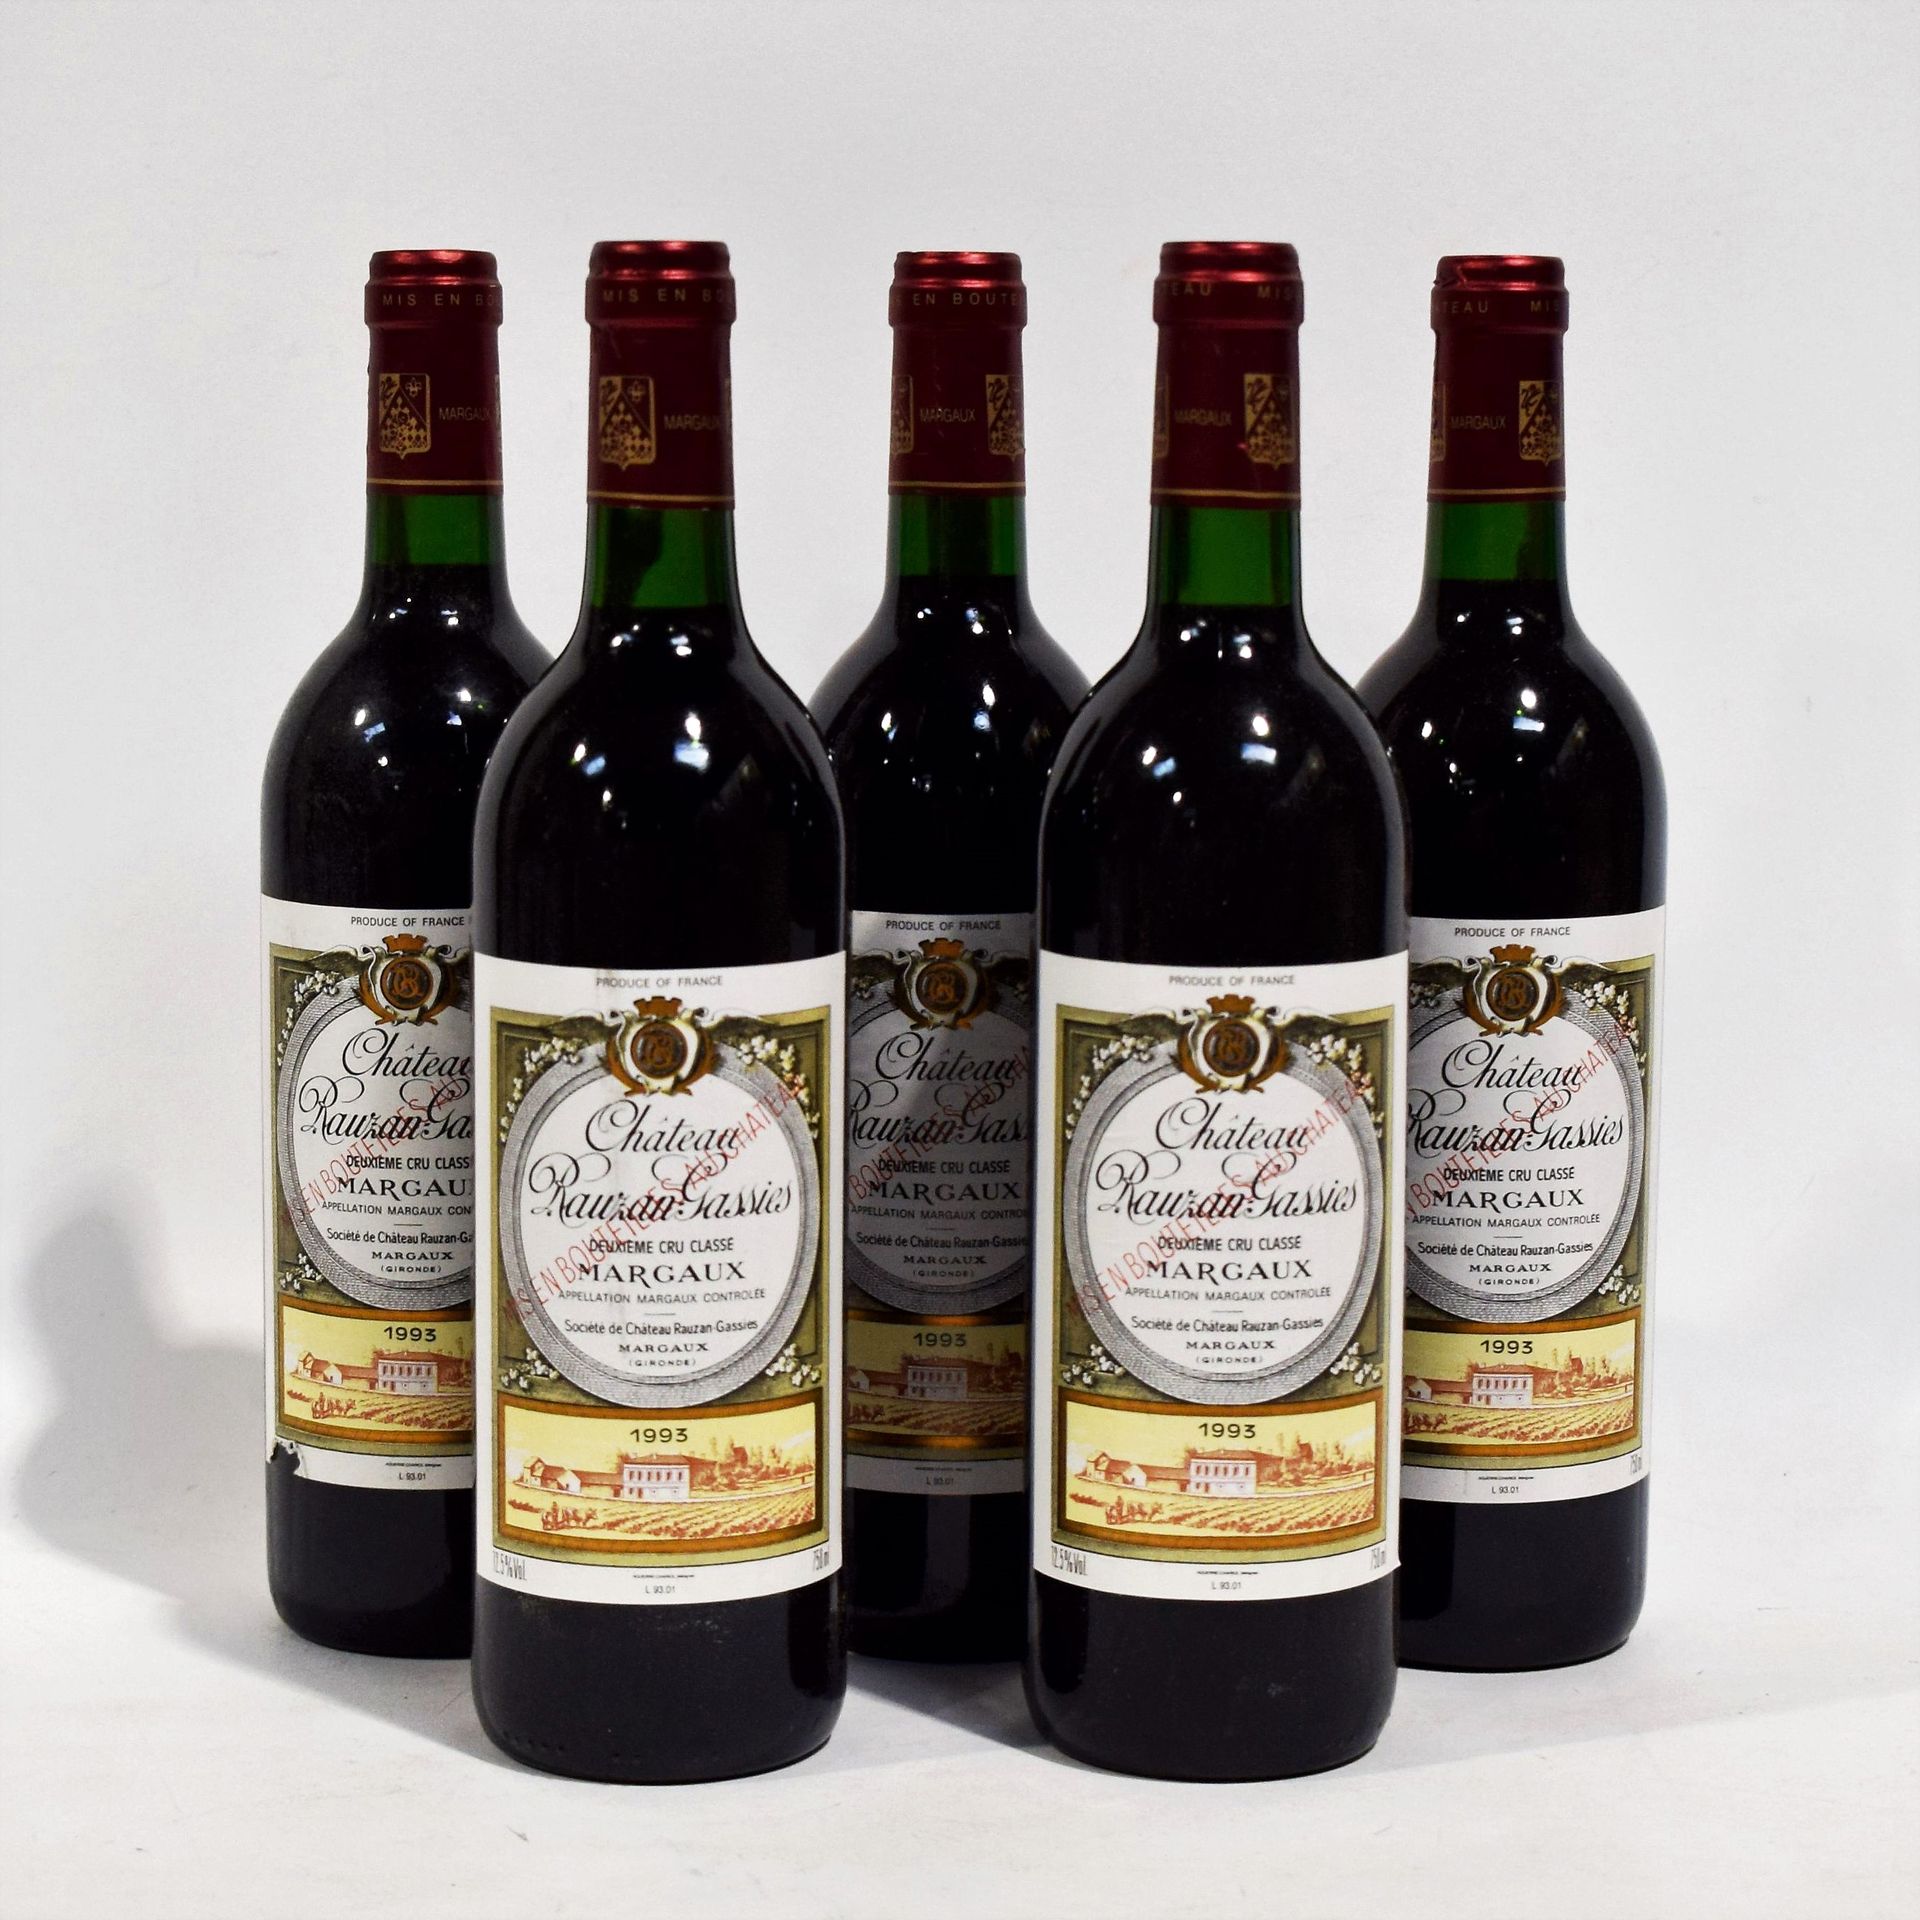 Null (MARGAUX) Set of 5 bottles of Château RAUZAN-GASSIES, Margaux, 2nd Grand Cr&hellip;